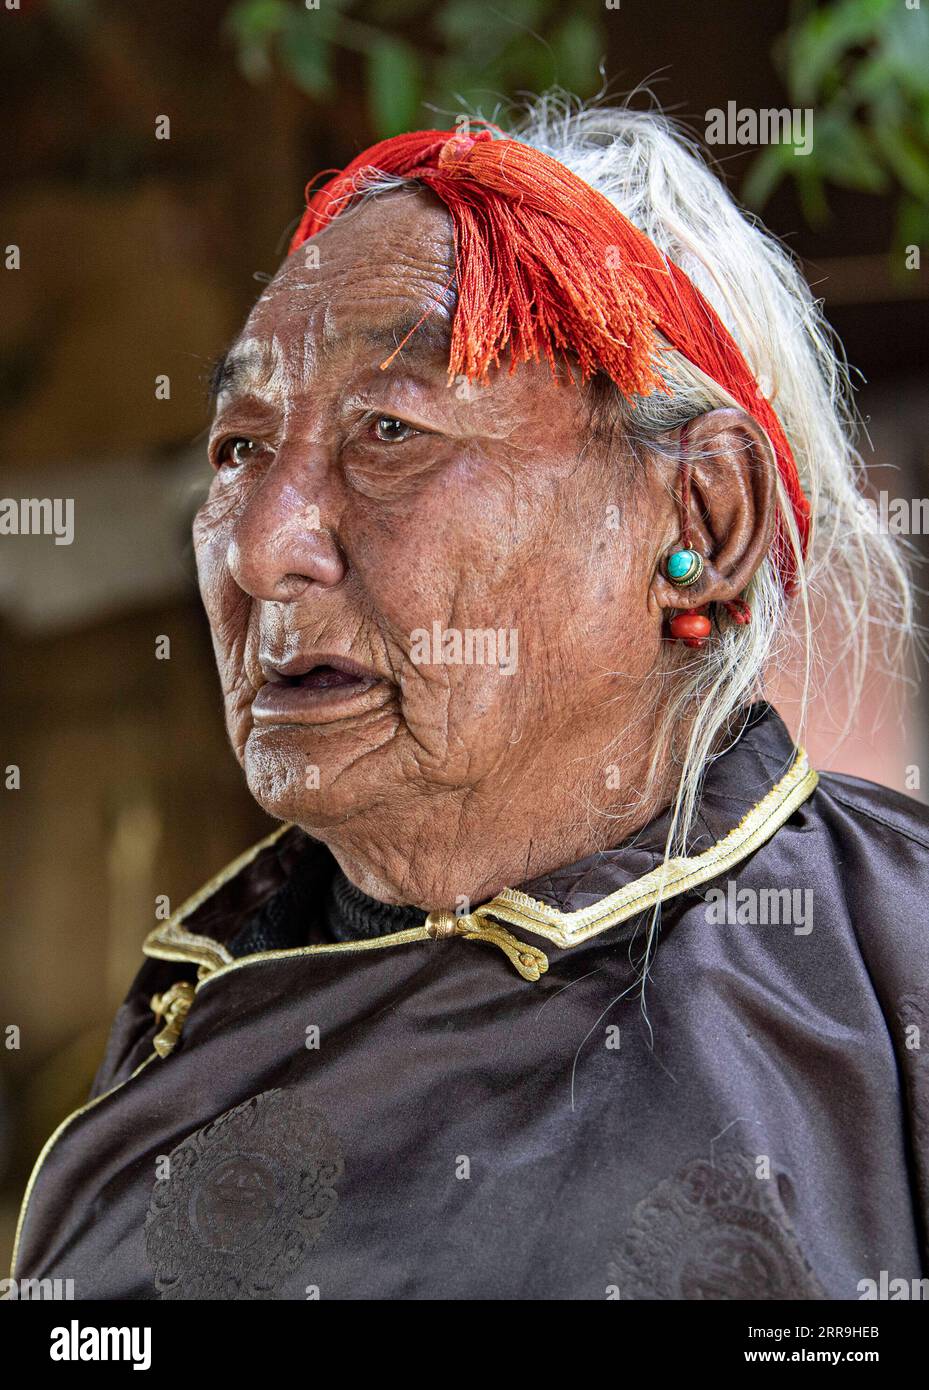 210617 -- LHASA, June 17, 2021 -- Sonam poses for a portrait at Xaga Village, Ema Township, Namling County, Xigaze City of southwest China s Tibet Autonomous Region, April 18, 2021. Sonam, 86, a resident of Xaga Village, started to do hard labor when he was 13 at a local manor, where, apart from babysitting the manor owner s children, he had to graze animals during the day and keep them fed over the night. He himself, however, did not have adequate food and clothing, and was forced to sleep with the animals at the sheepfold. I had been verbally and physically abused so often that I simply went Stock Photo